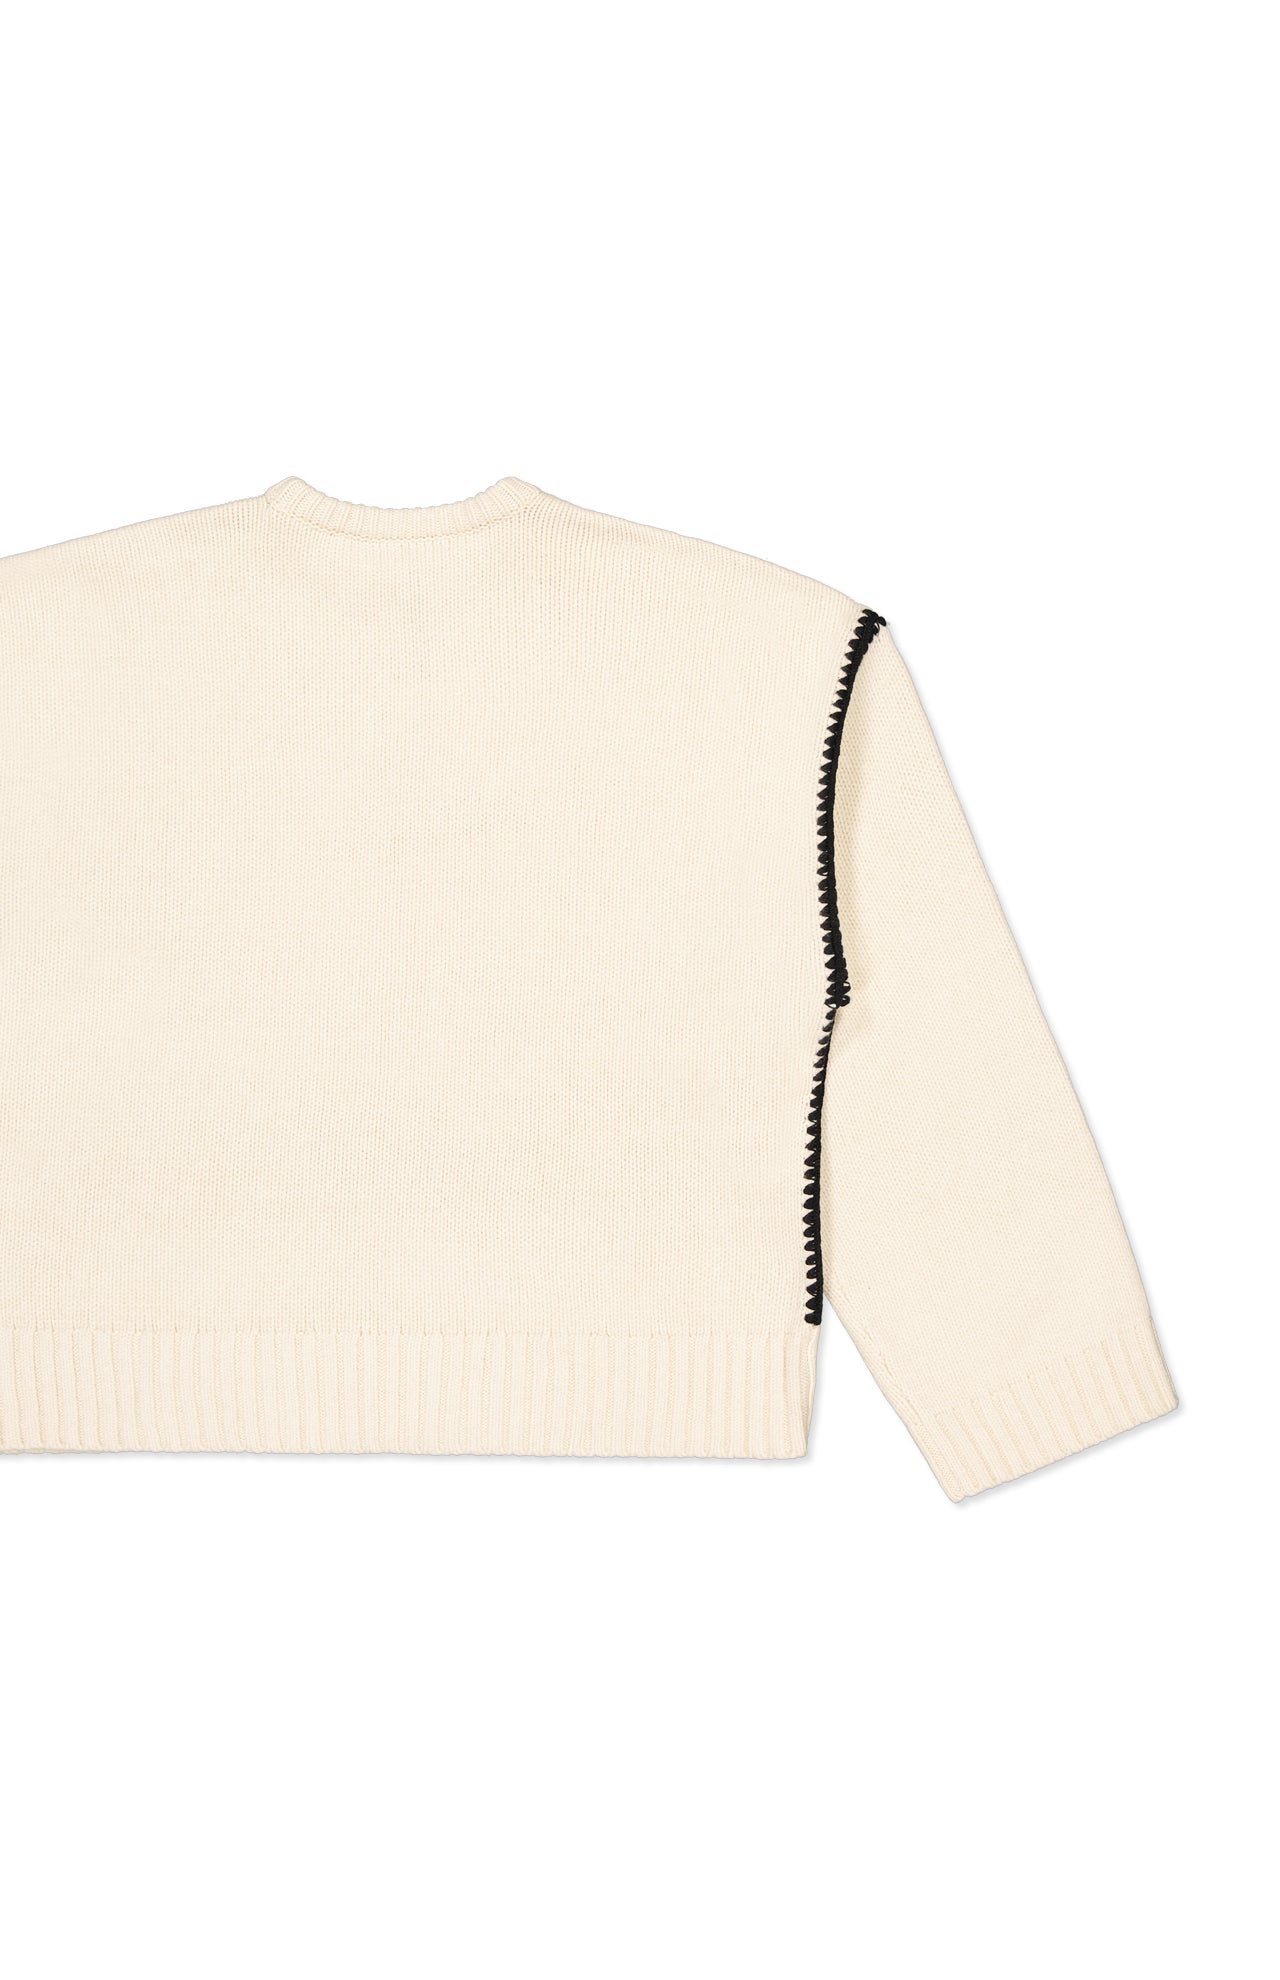 Embroidered Wool Cashmere Knit (7312312336499)